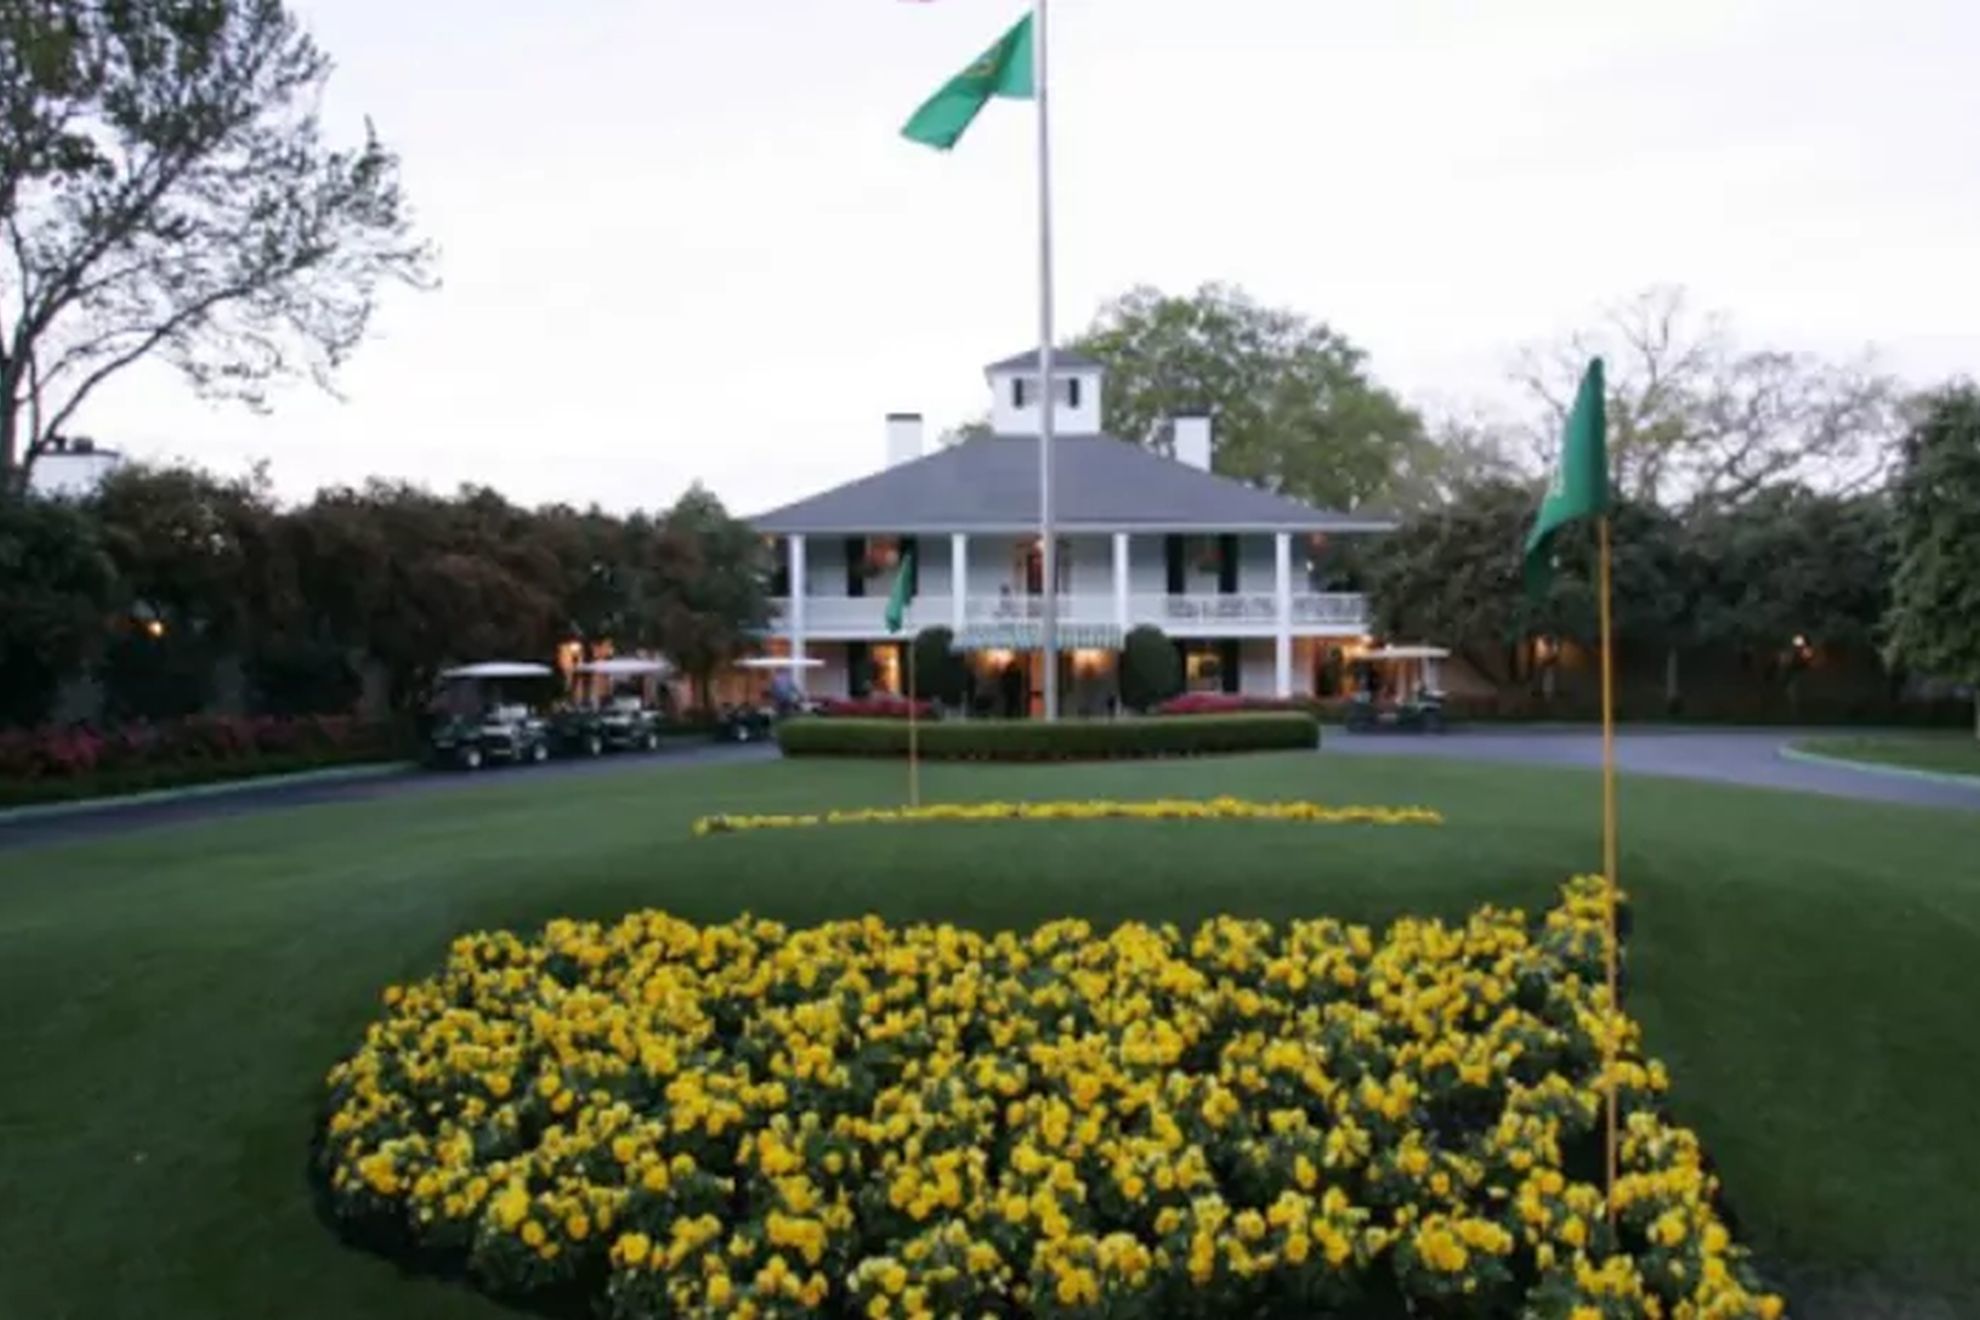 Masters 2023 Tee Times: TV Schedule, Pairing and Groups